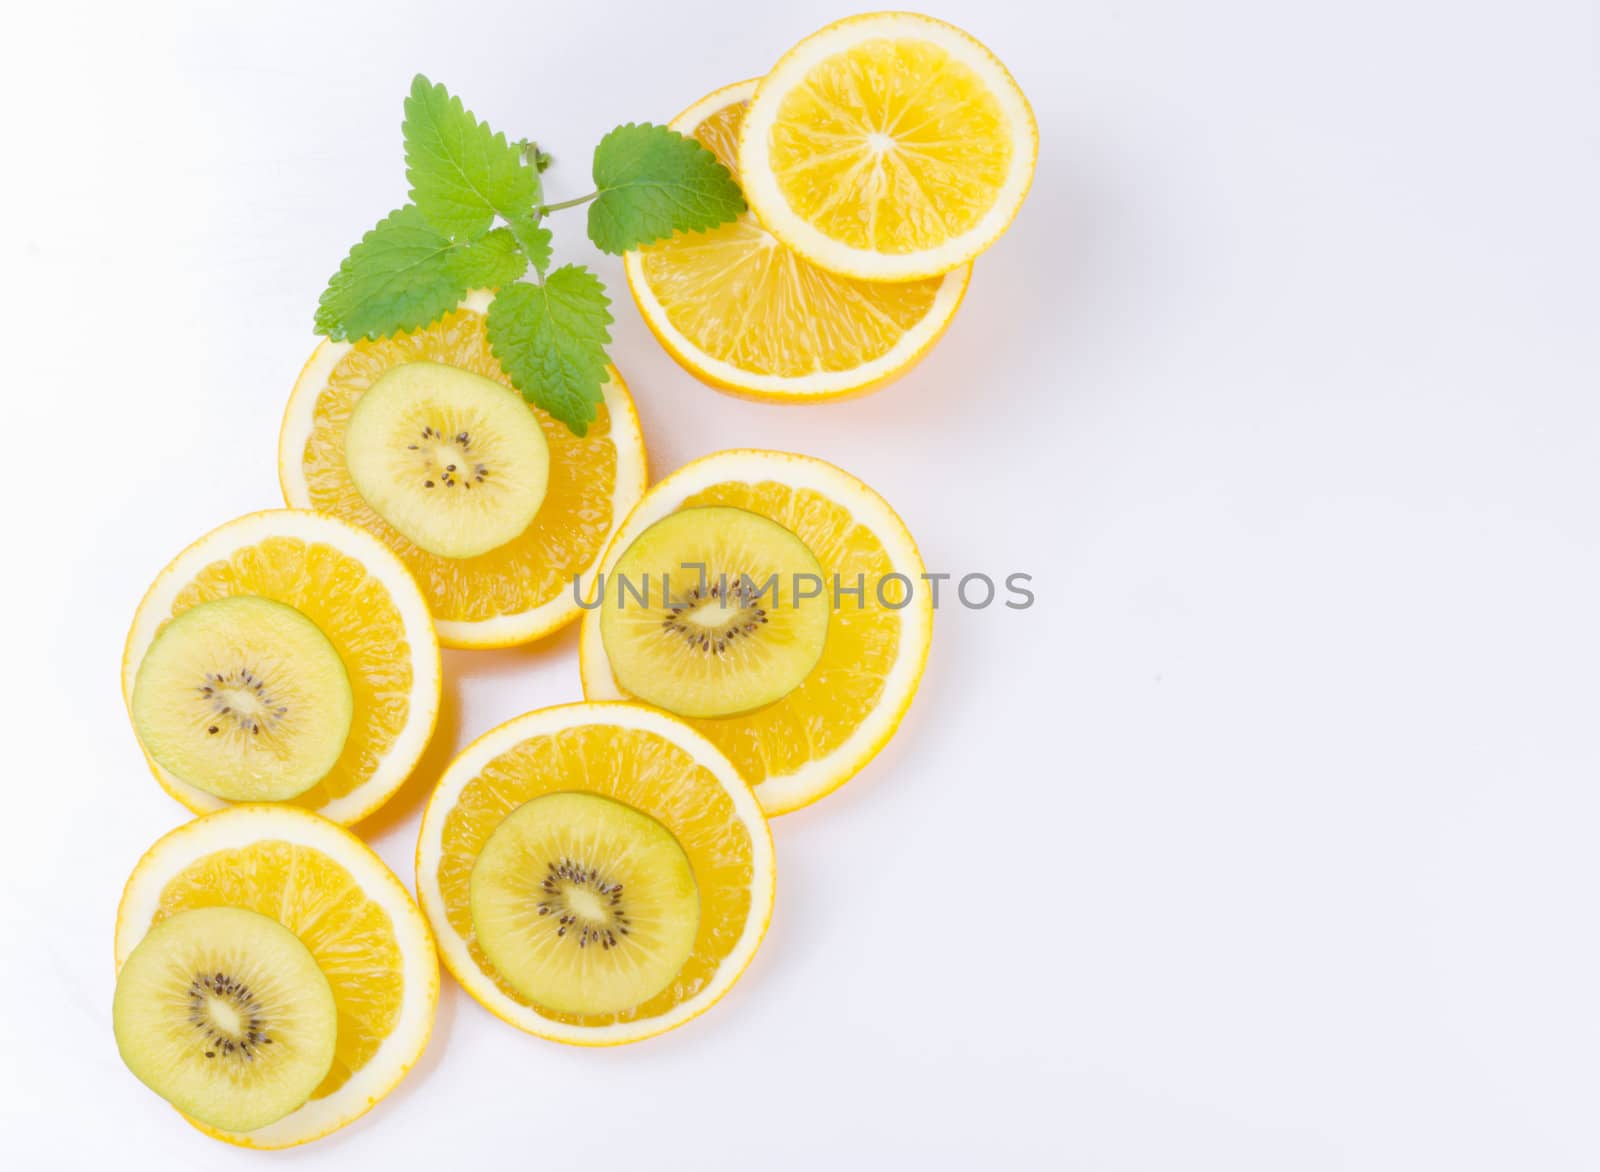 Citrus is believed to have originated in the part of Southeast Asia bordered by Northeastern India, Myanmar (Burma) and the Yunnan province of China